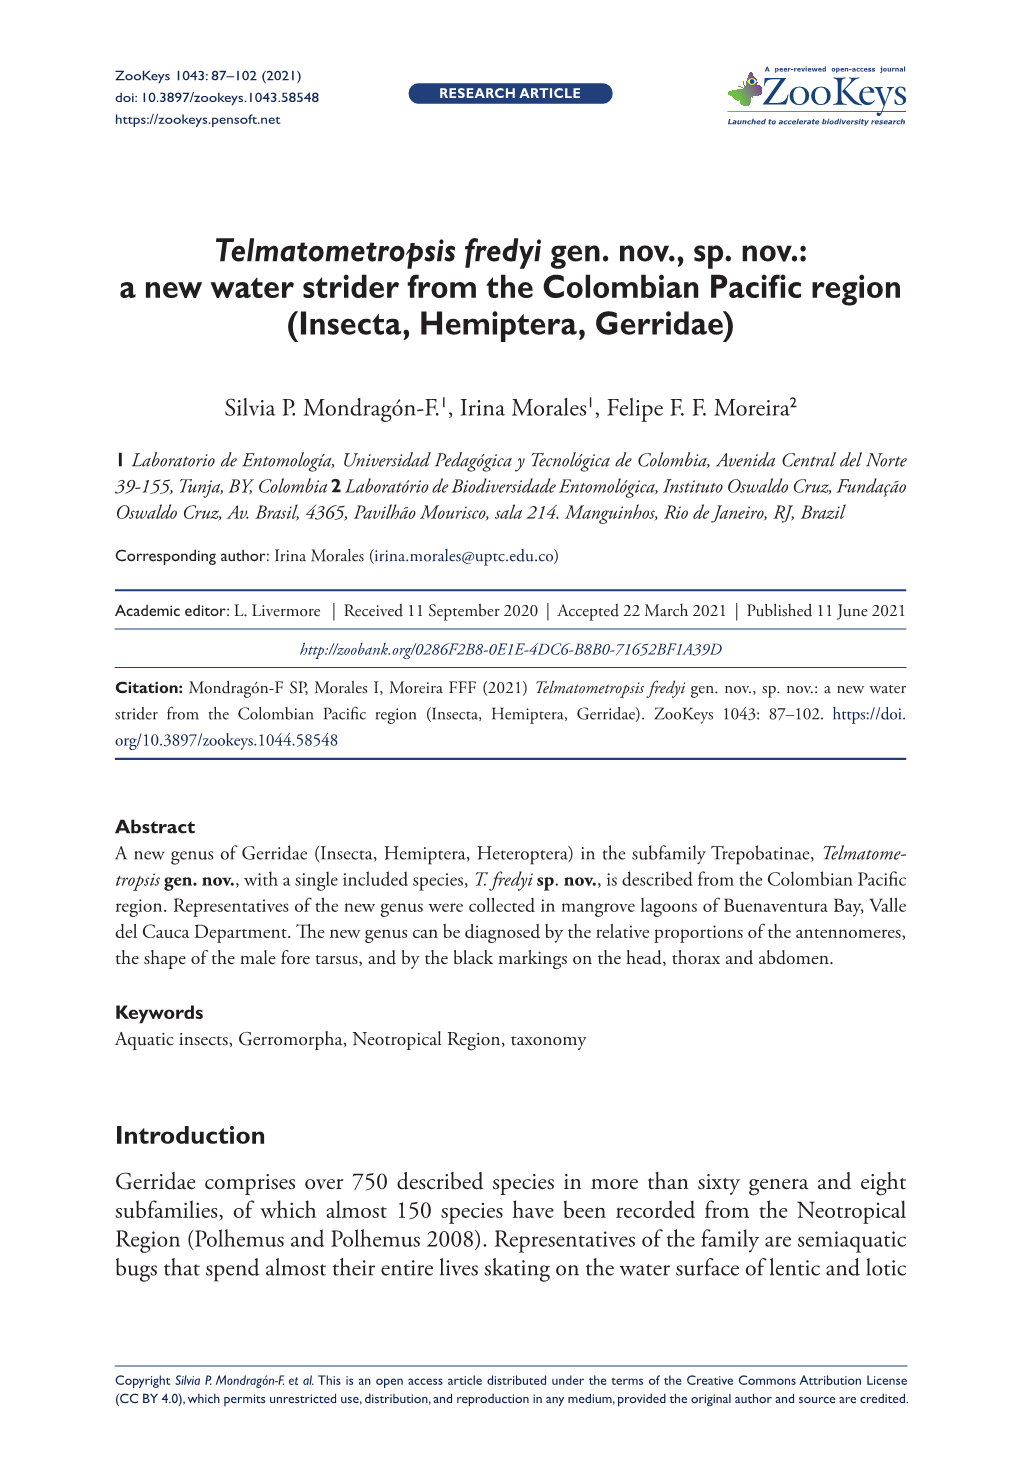 Gen. Nov., Sp. Nov.: a New Water Strider from the Colombian Pacific Region (Insecta, Hemiptera, Gerridae)